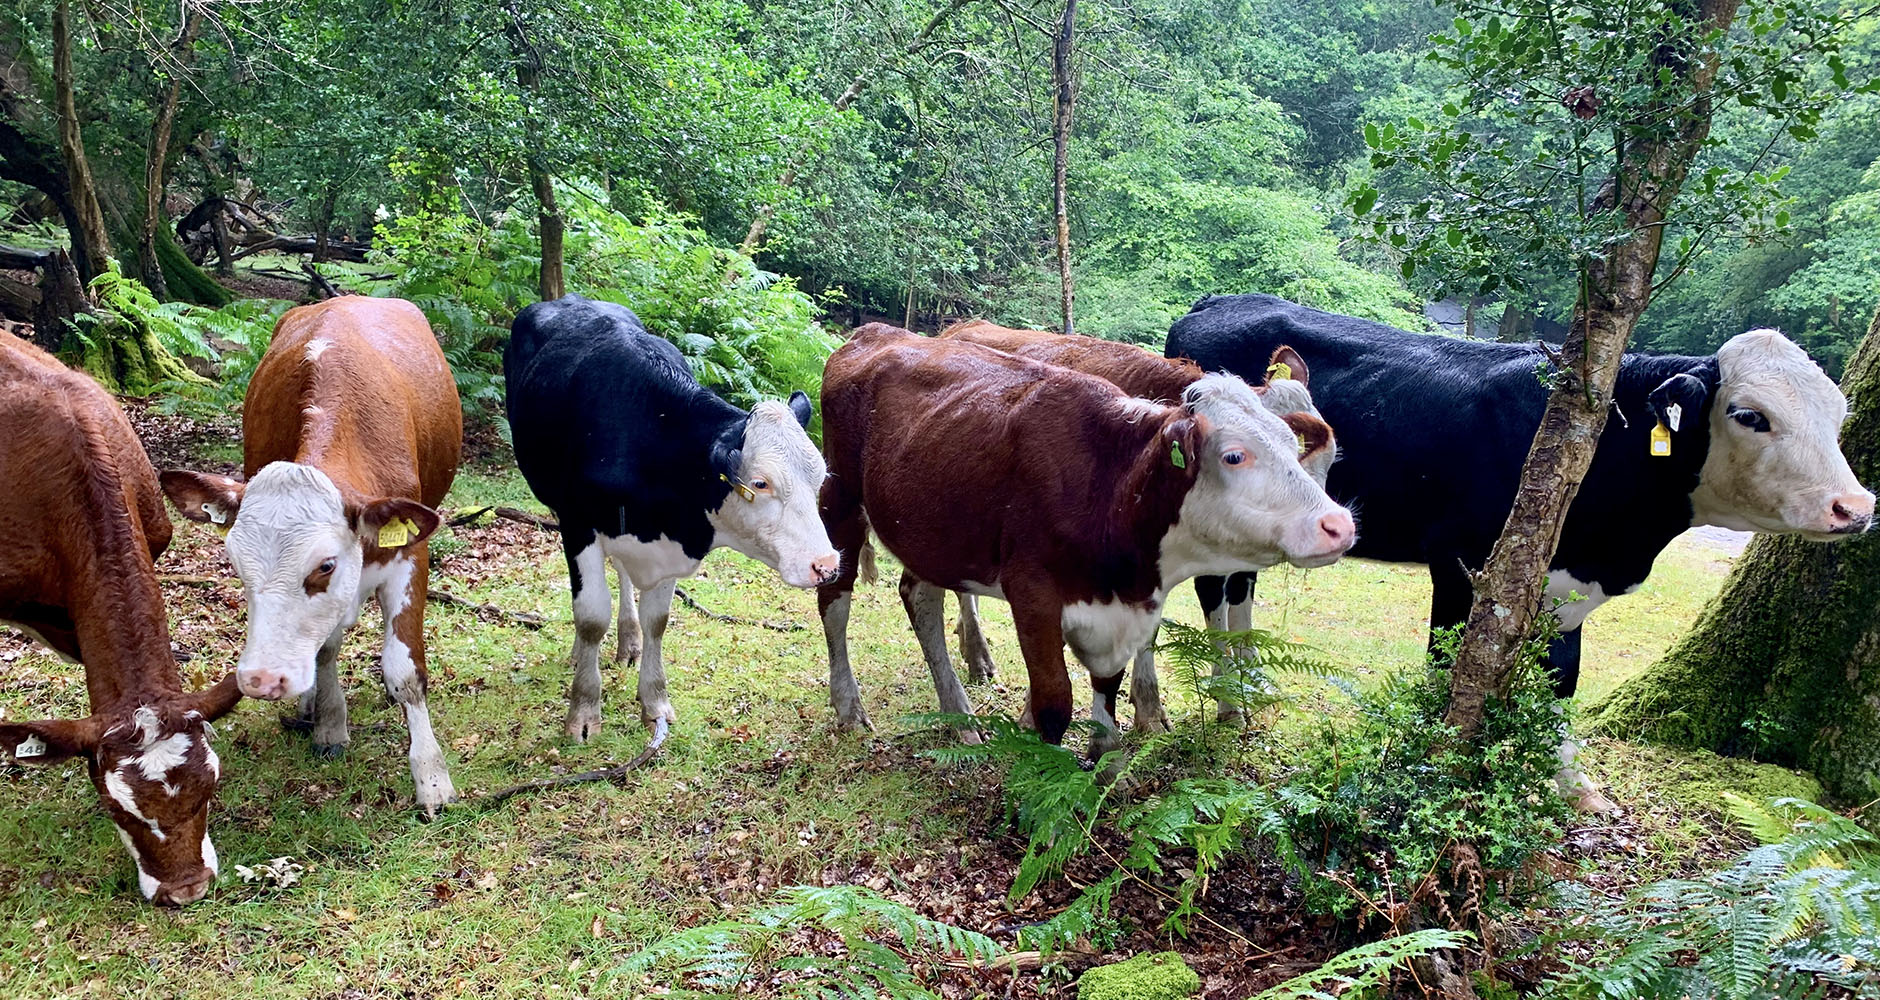 Tom's cattle living their best lives in the forest